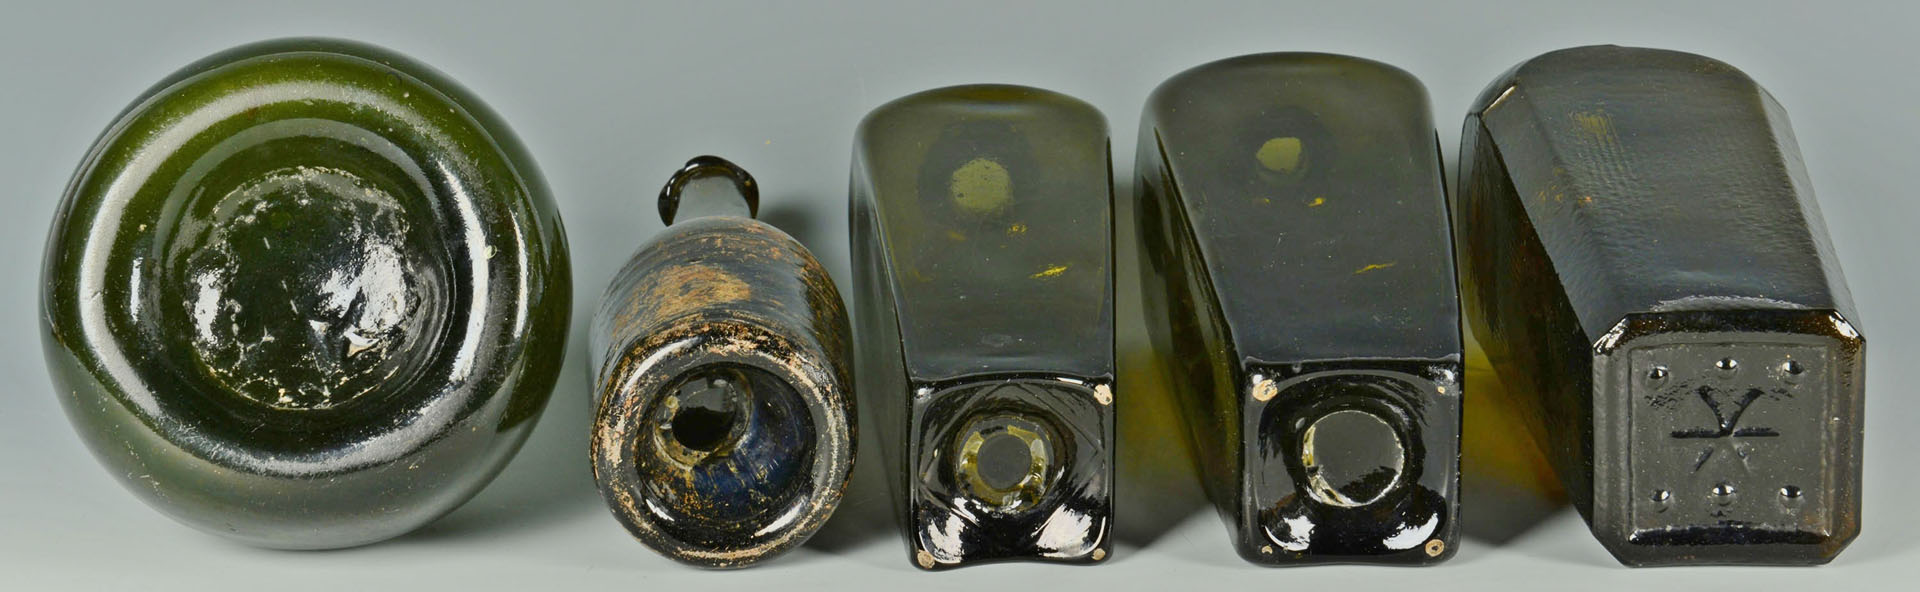 Lot 159: 5 Colored wine & gin bottles, 18th/19th c.